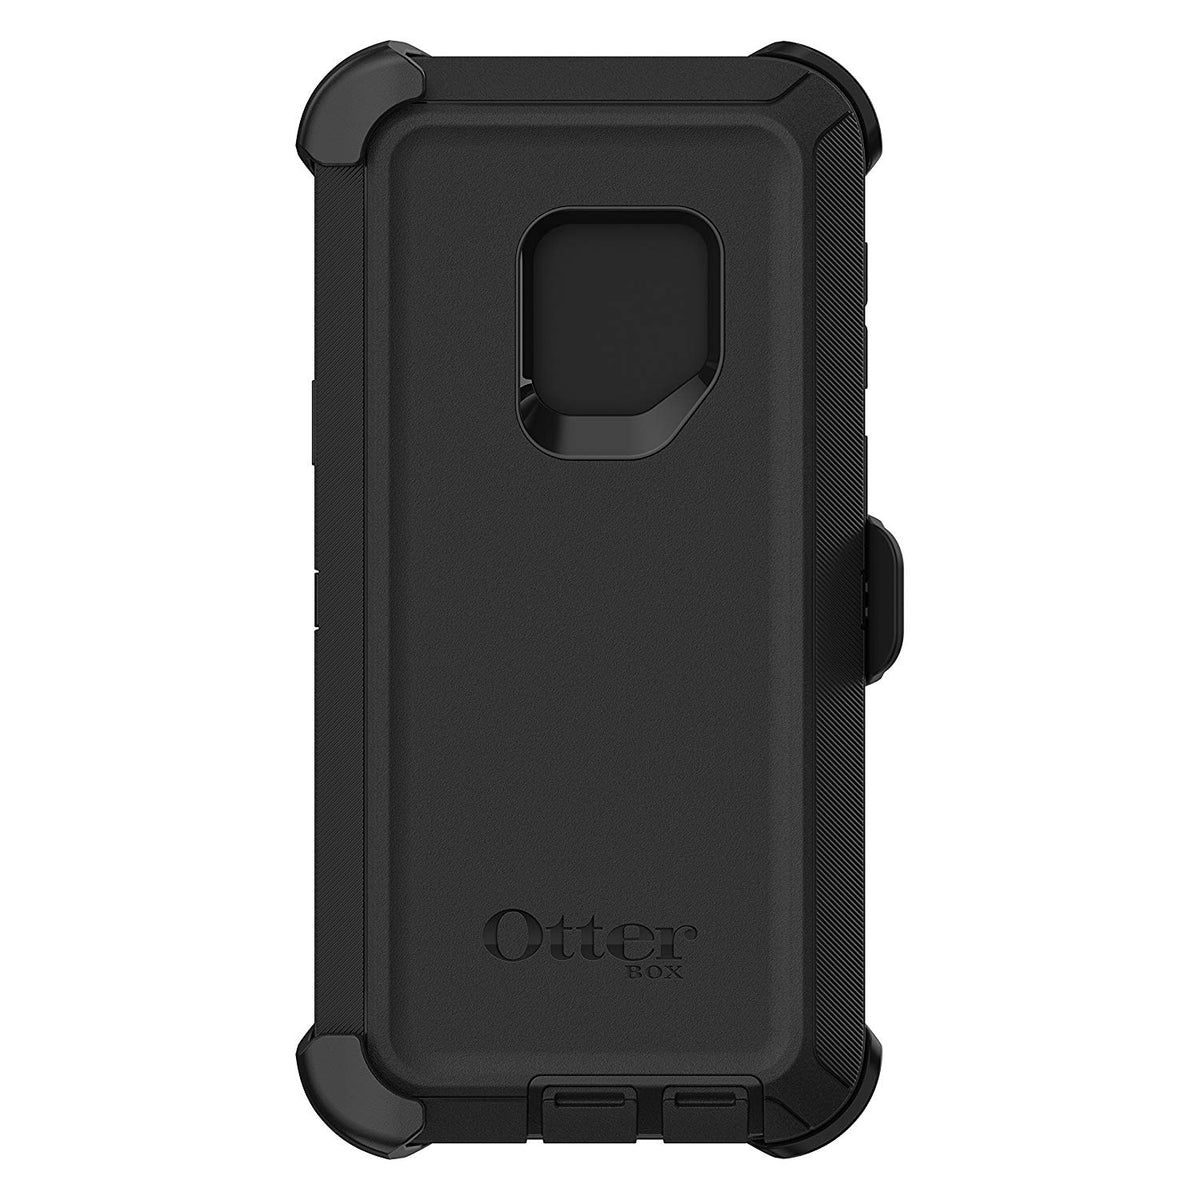 OtterBox 77-57814 Defender Series Screenless Edition Case for Galaxy S9, Black